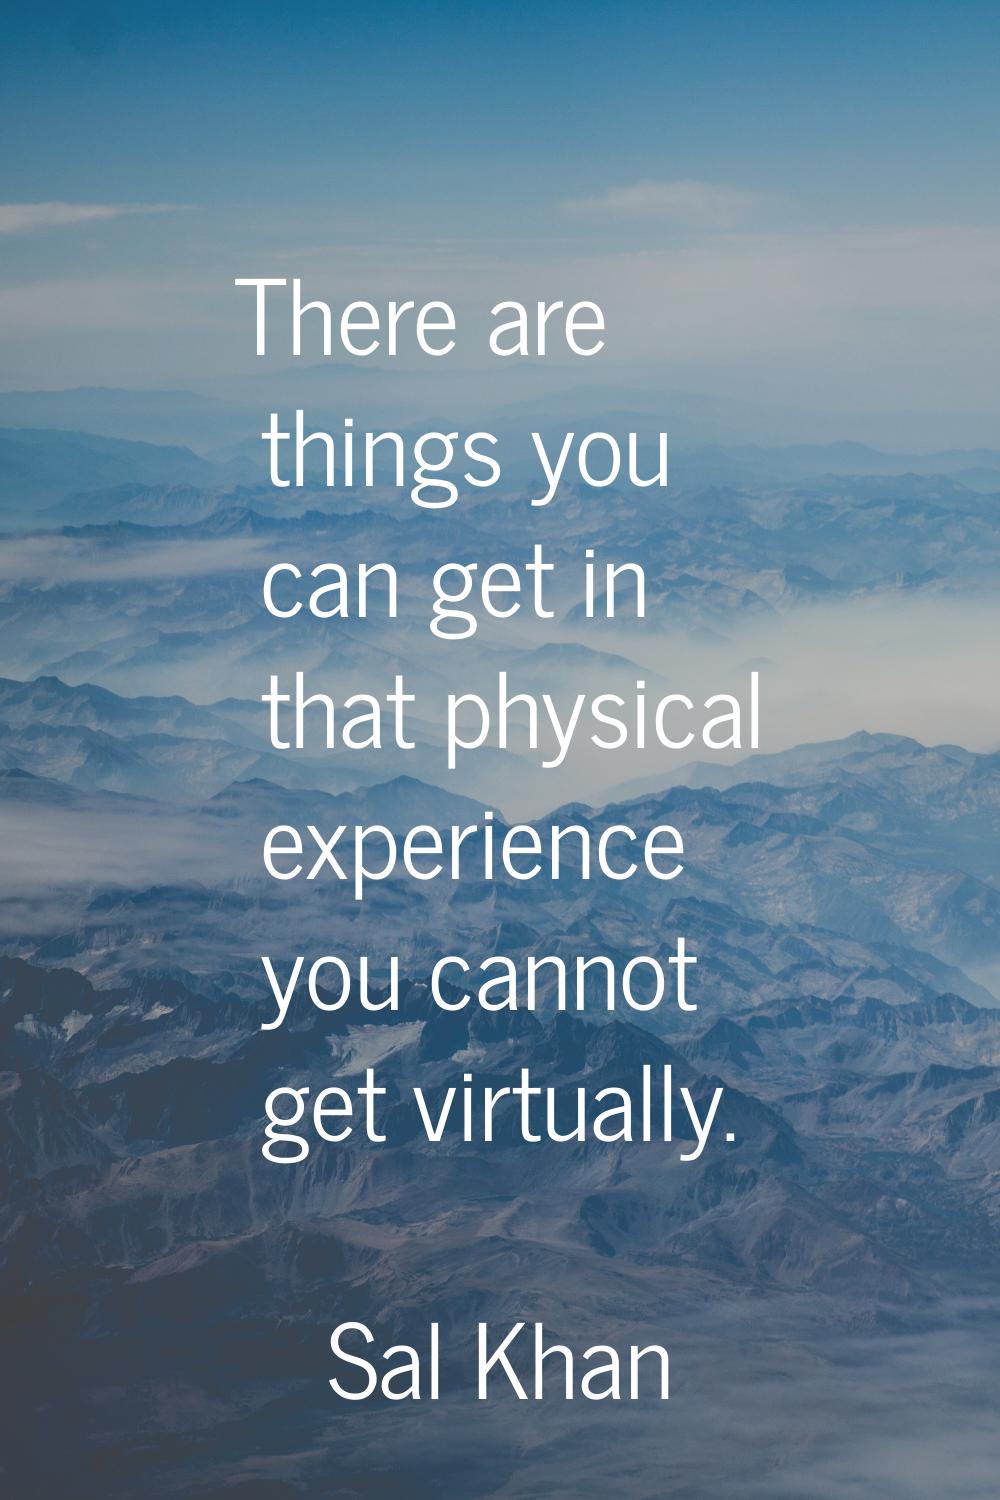 There are things you can get in that physical experience you cannot get virtually.